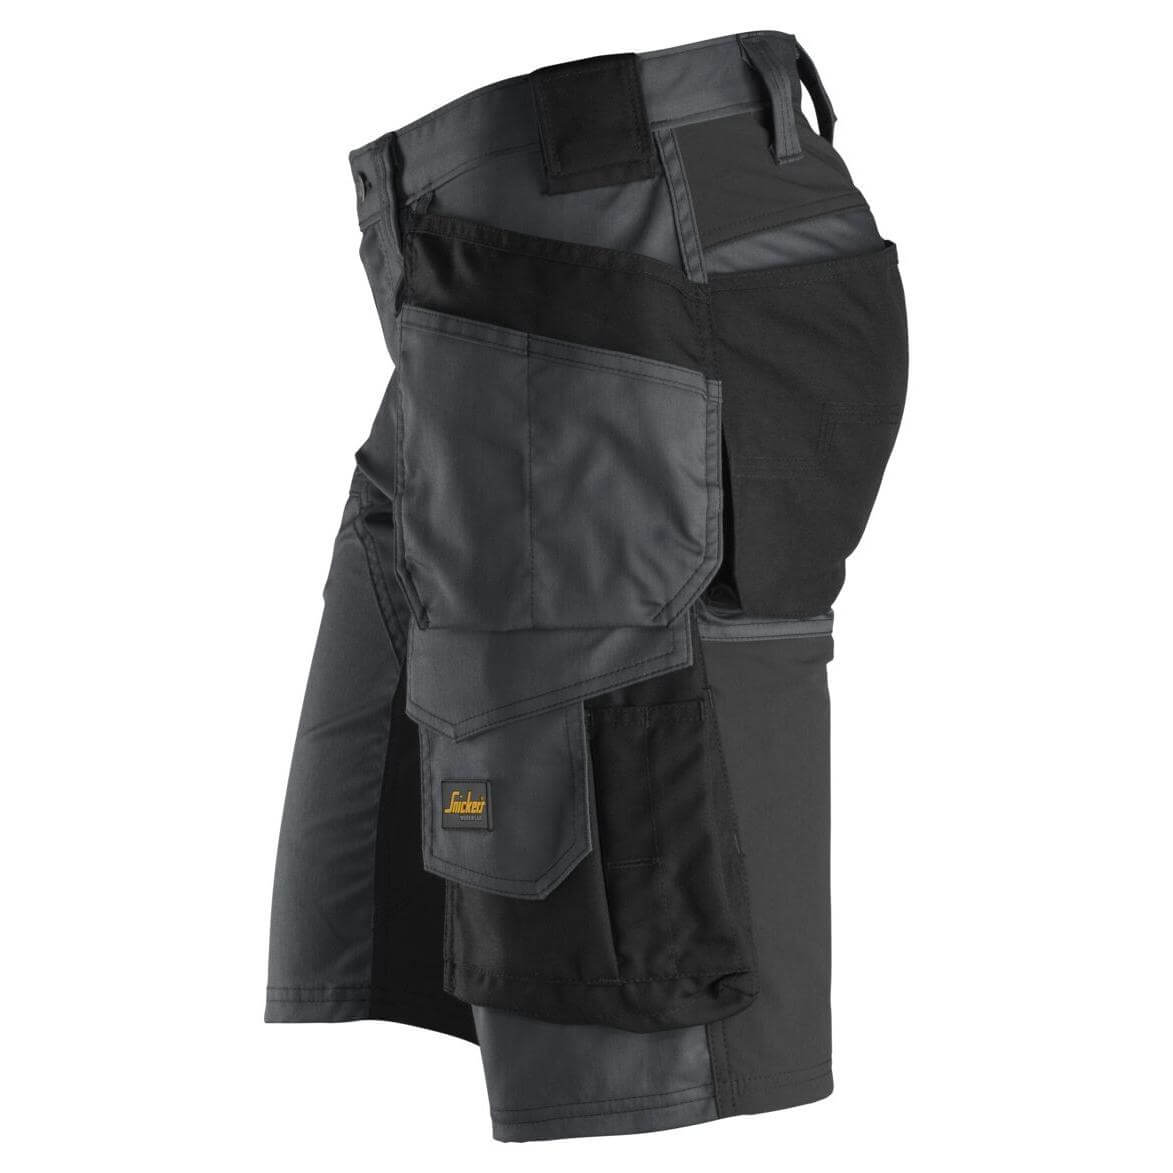 Snickers 6141 AllroundWork Slim Fit Stretch Shorts with Holster Pockets Steel Grey Black left #colour_steel-grey-black